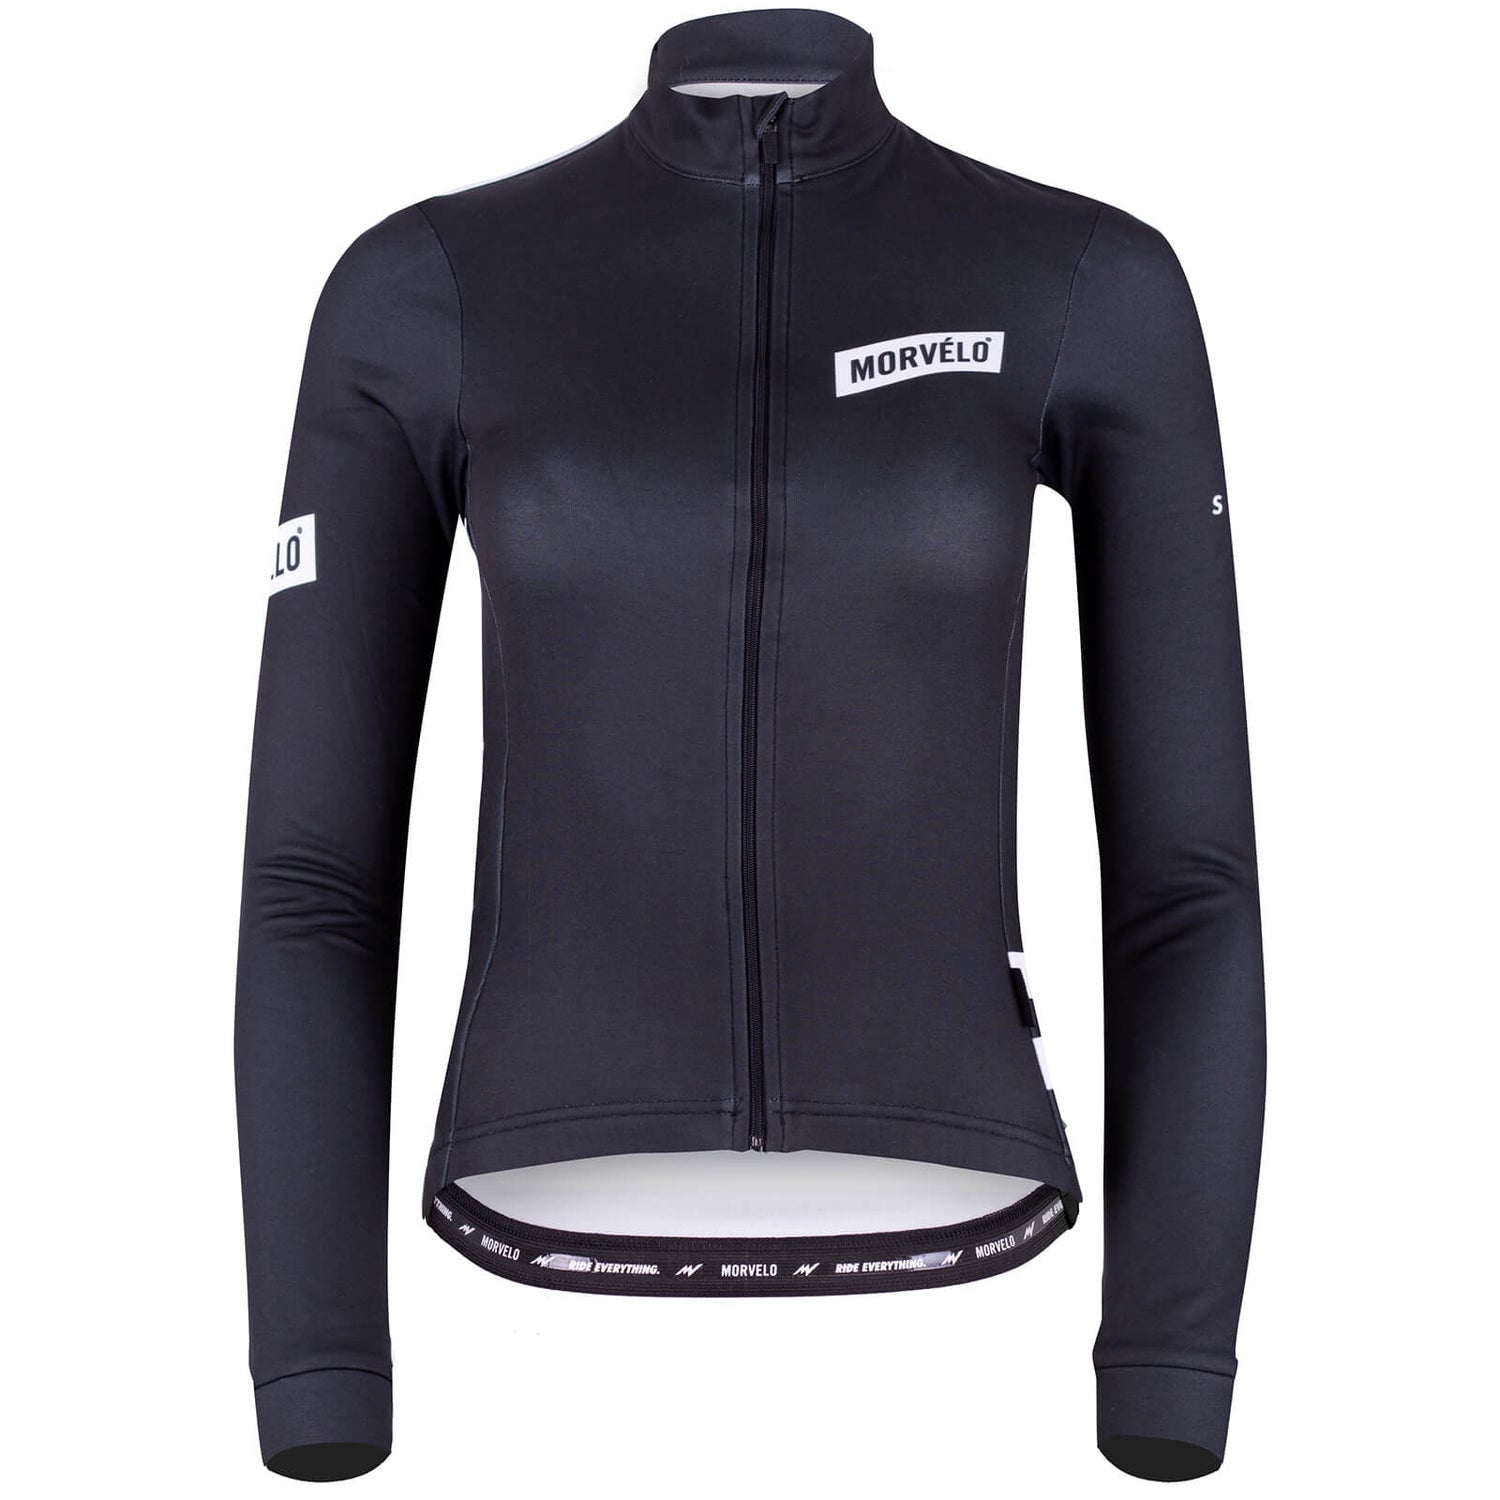 Women's Stealth ThermoActive Long Sleeve Jersey